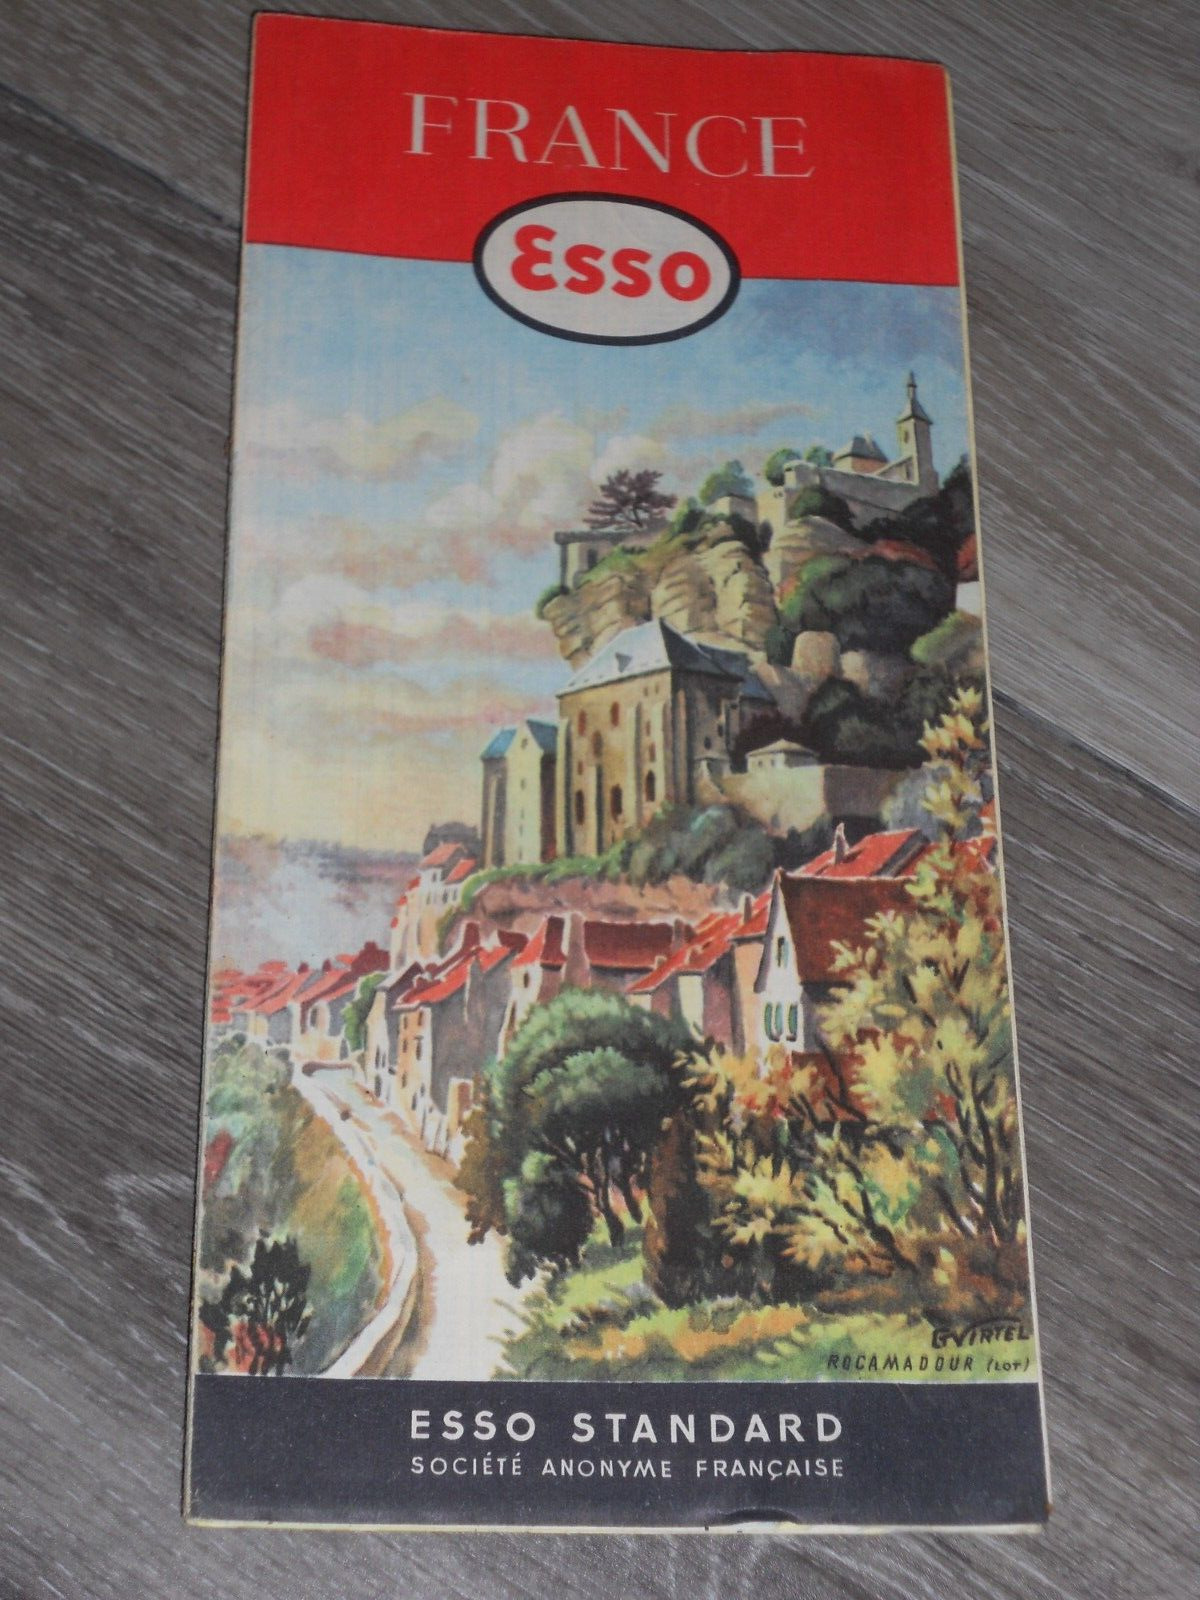 France Road Map Courtesy of Esso 1954 Edition